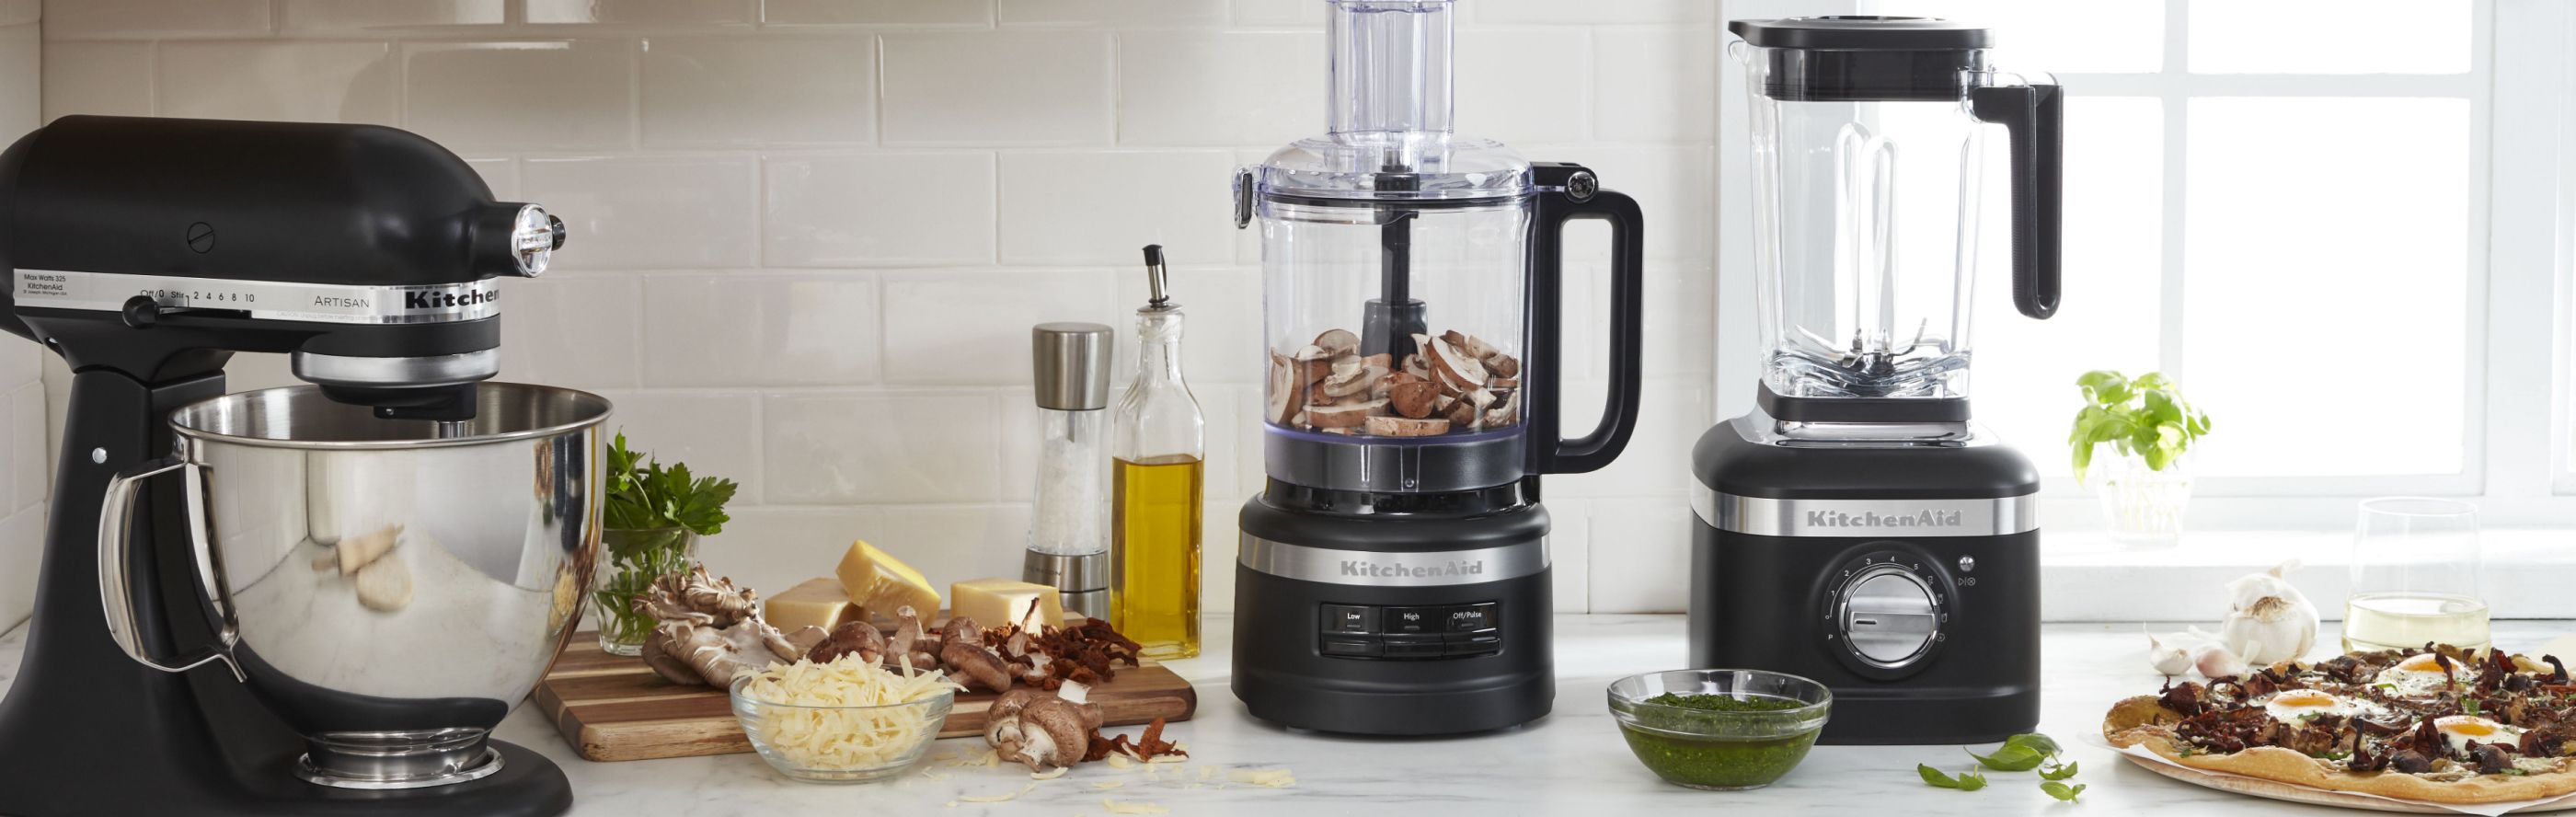 Stand mixer, food processor and blender on kitchen counter with ingredients